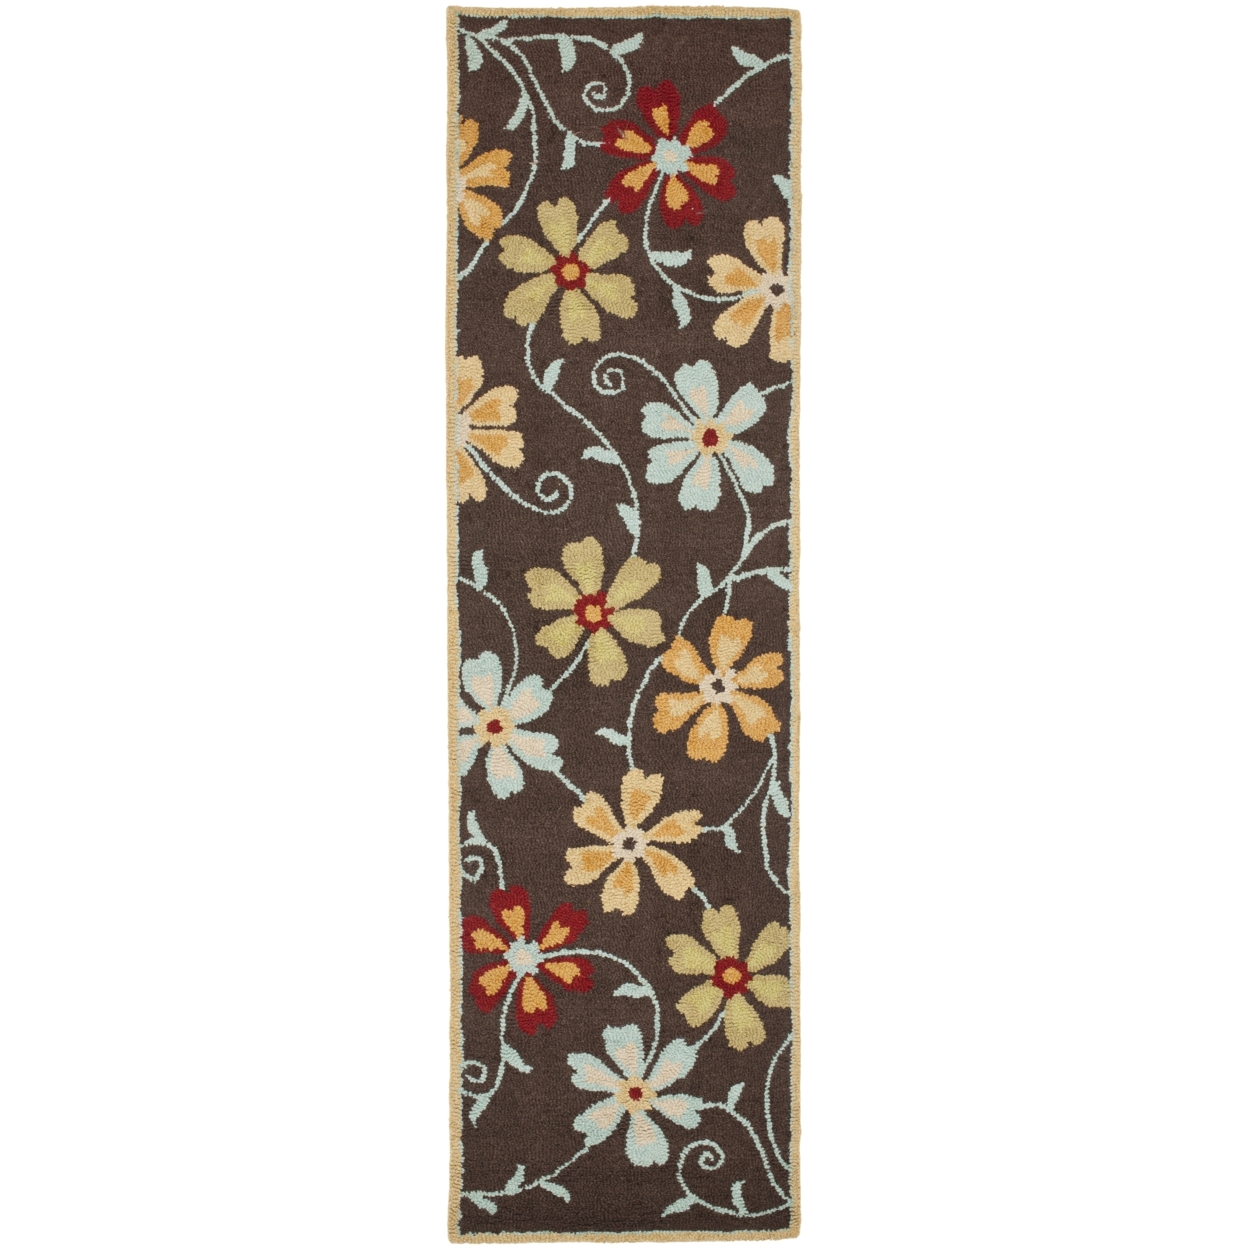 SAFAVIEH Blossom BLM784A Hand-hooked Brown / Multi Rug - 8' X 10'